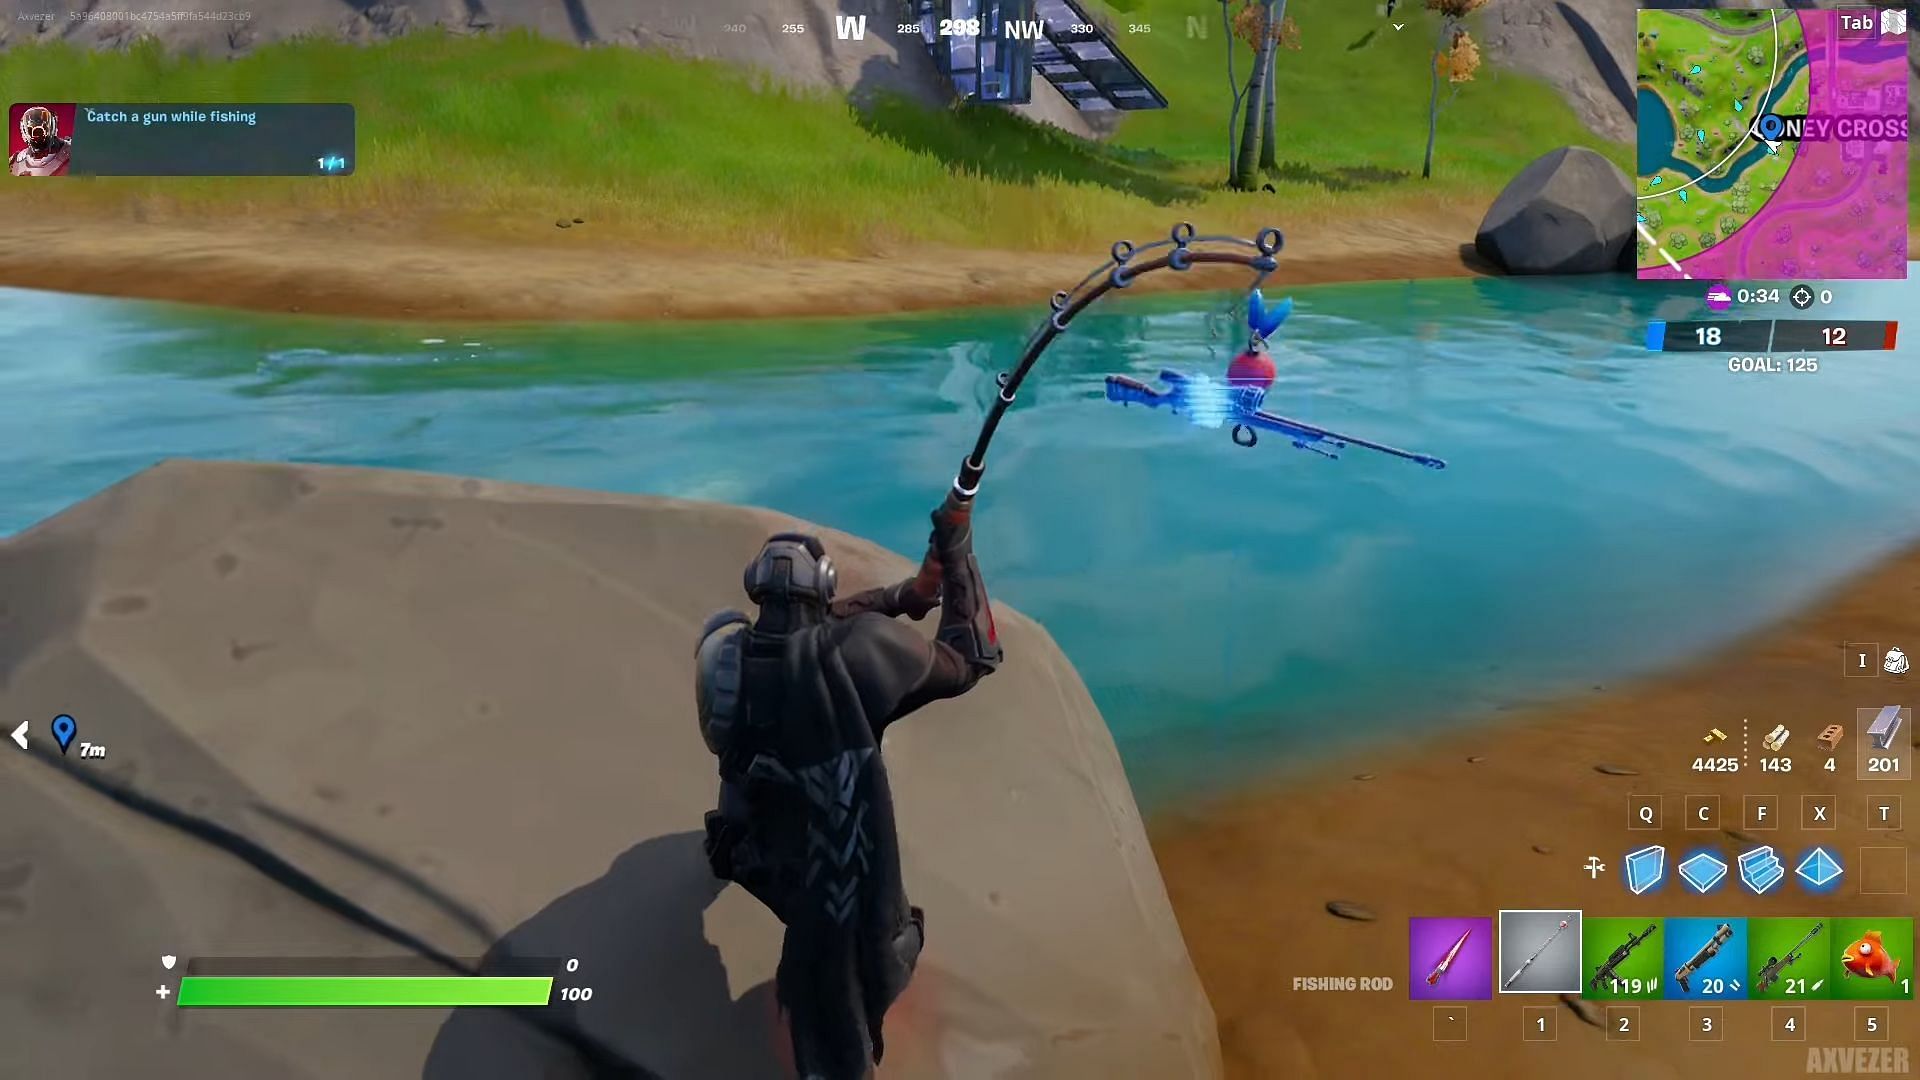 Catching a gun while fishing is very easy (Image via Epic Games)